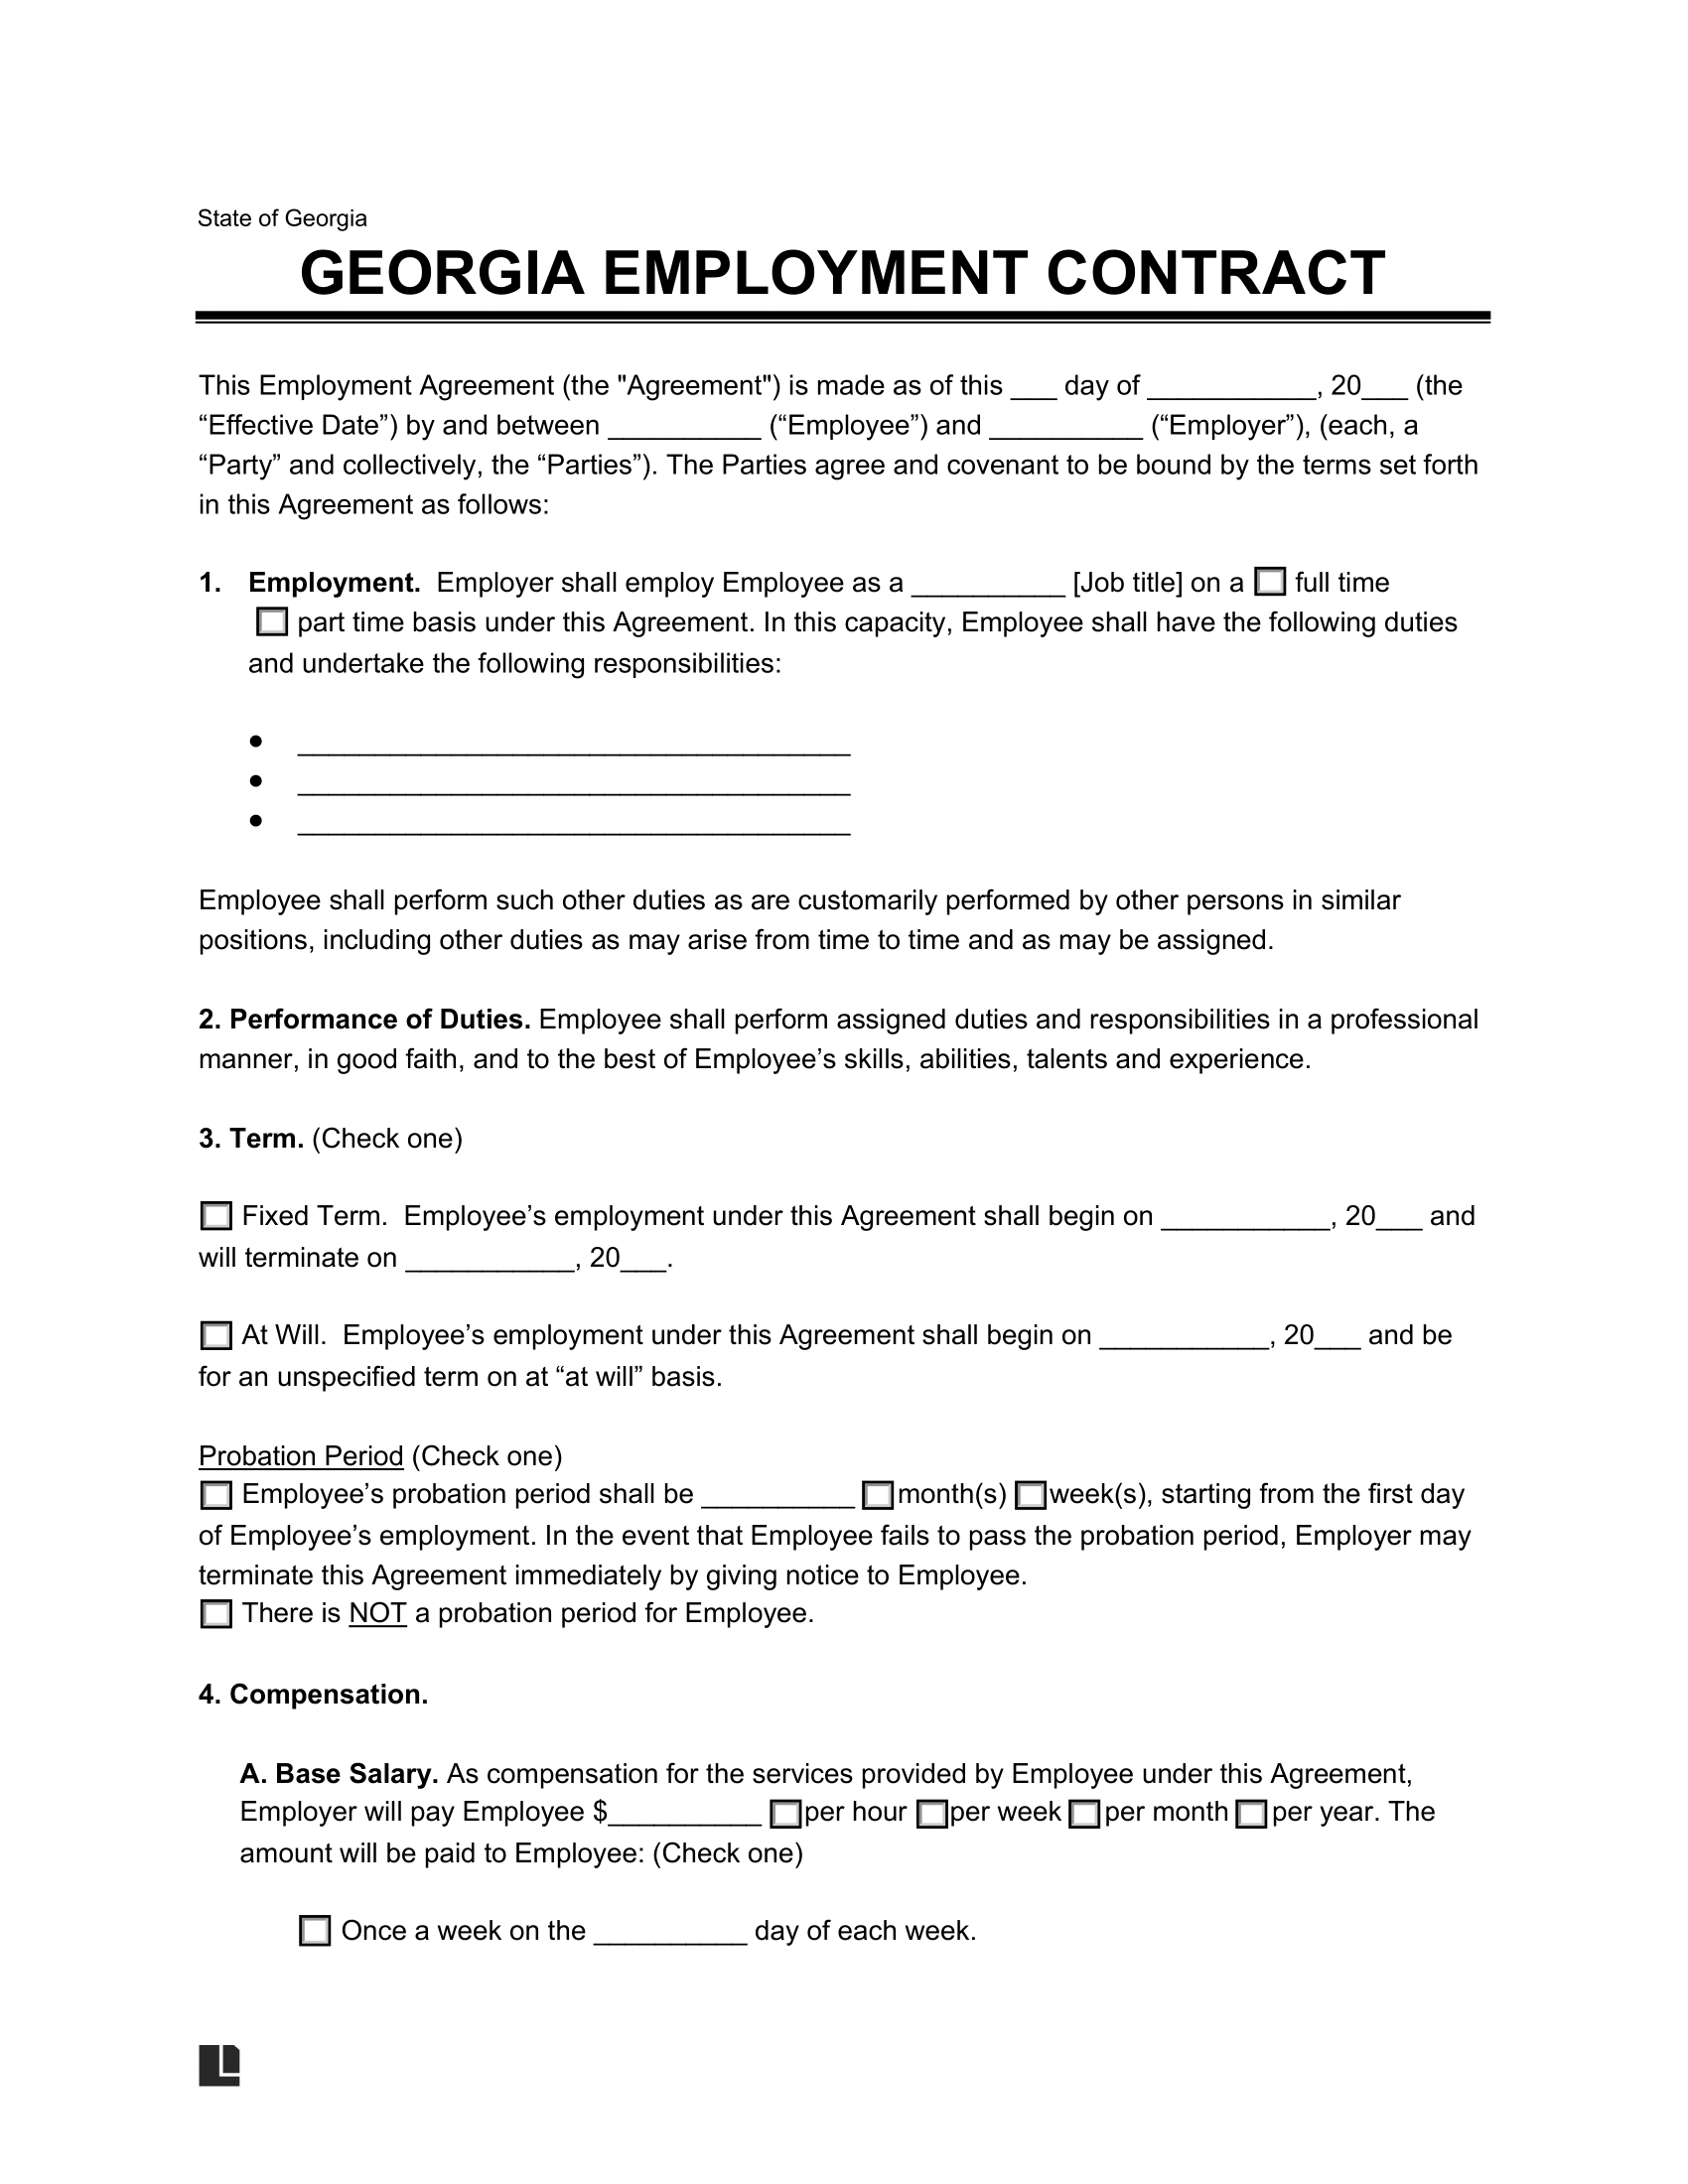 georgia employment contract template